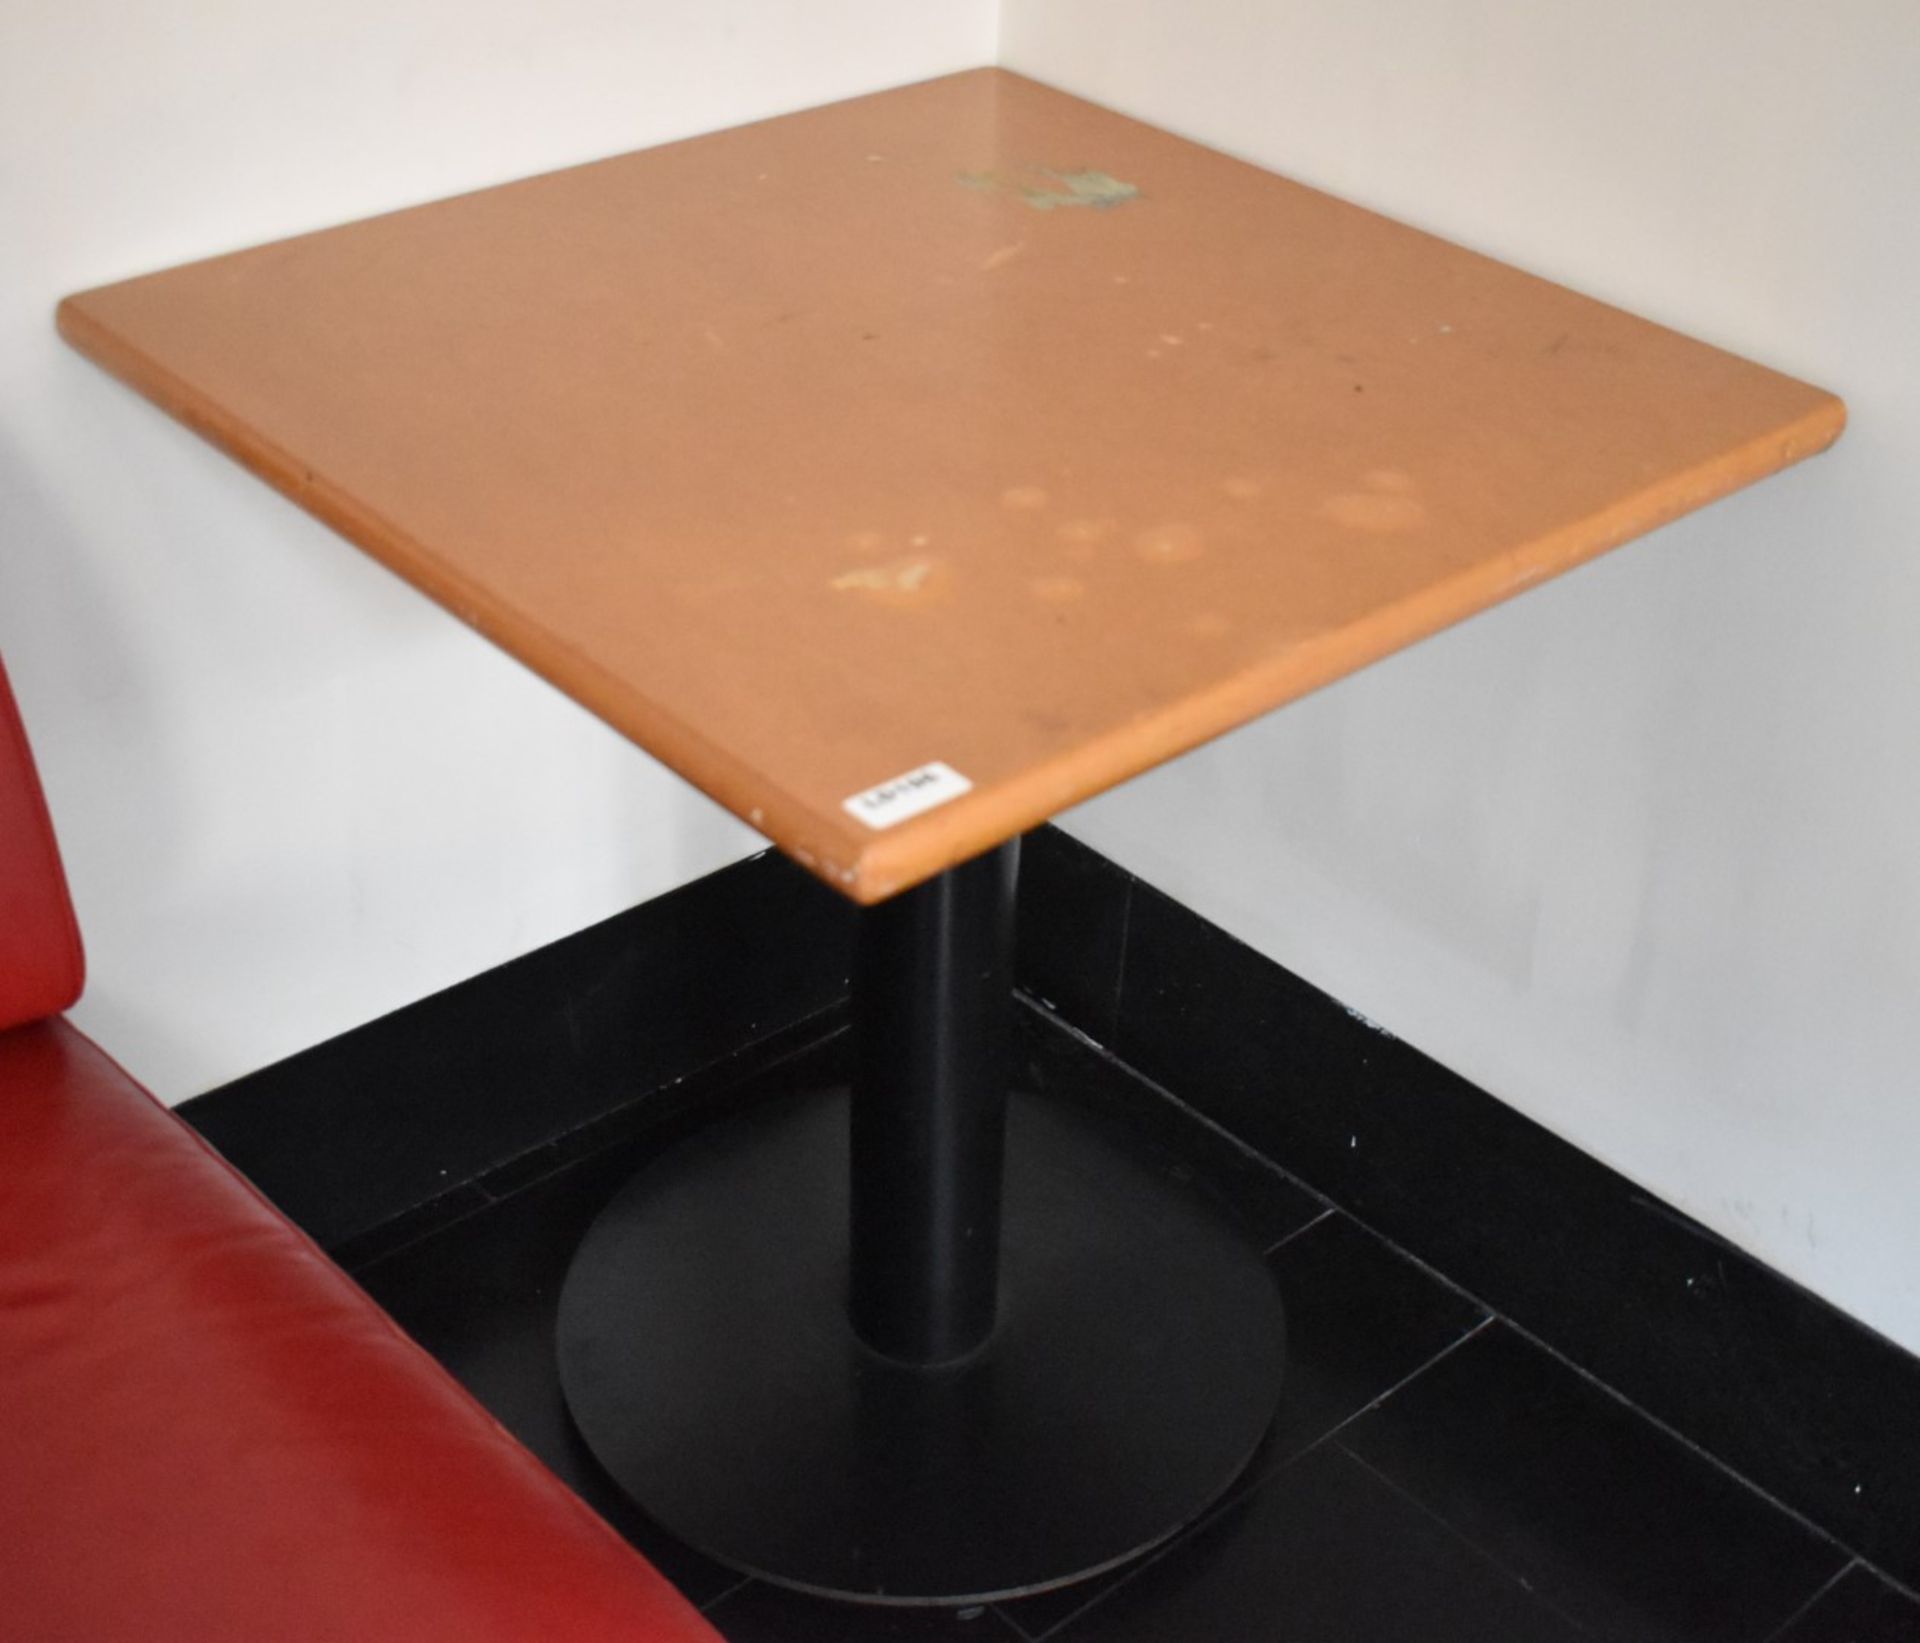 1 x Small Bistro Table With Cast Iron Base - 70 x 70 cms Surface - CL392 - Ref LD196 3F -